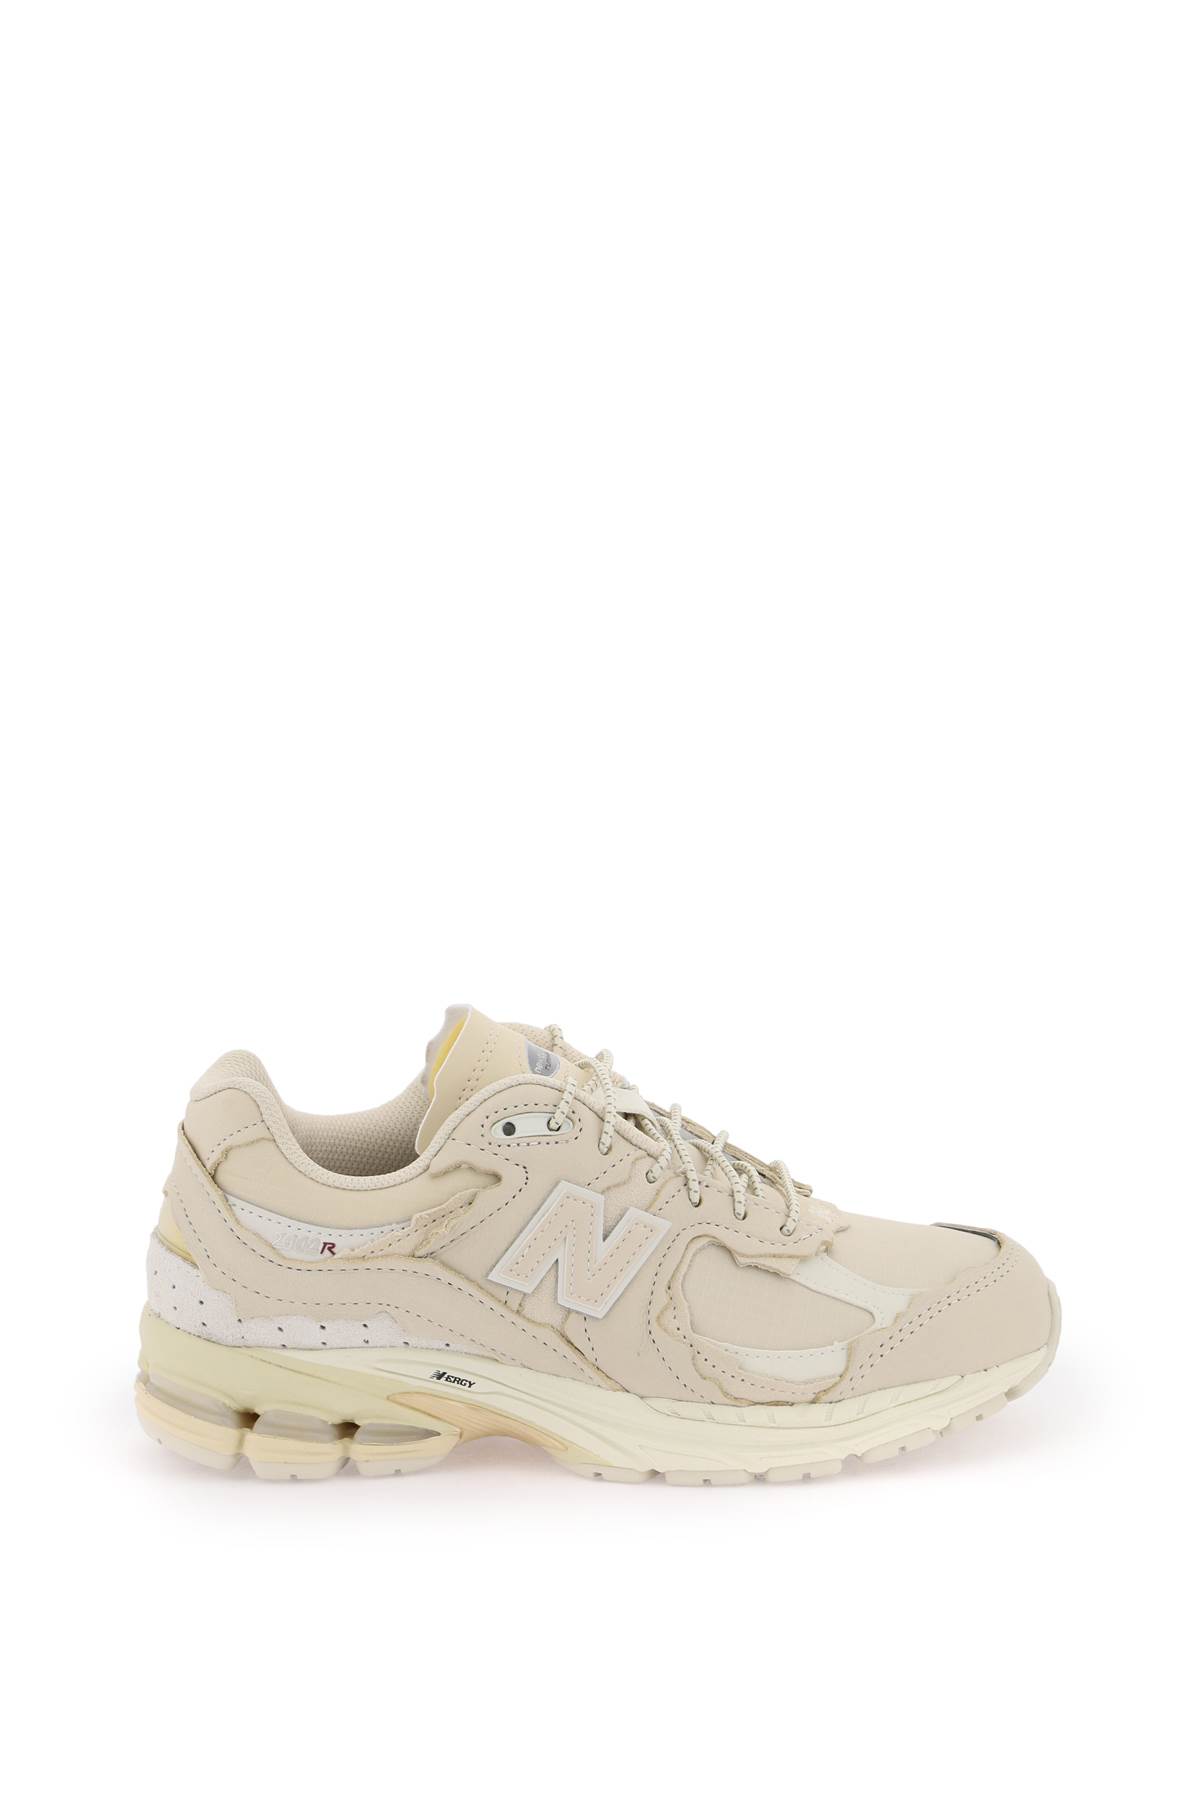 Shop New Balance 2002rd Sneakers In Sand Stone (beige)